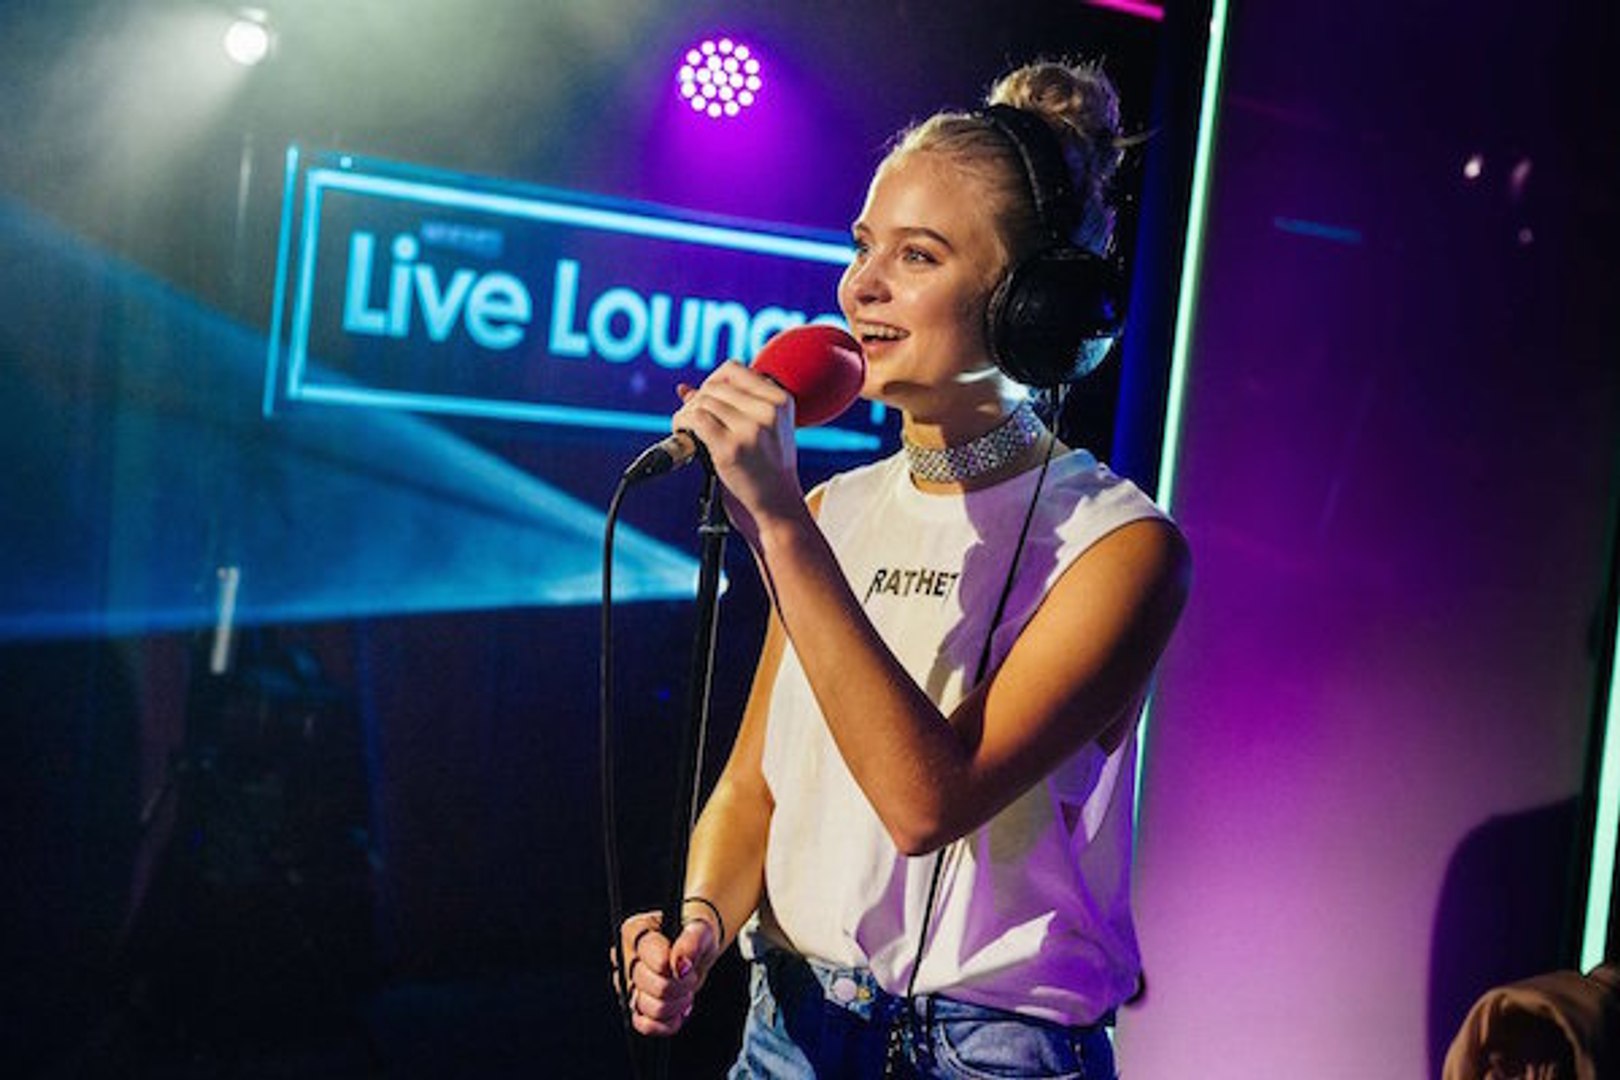 Zara Larsson - Ain't My Fault - Live Lounge BBC1 - video Dailymotion